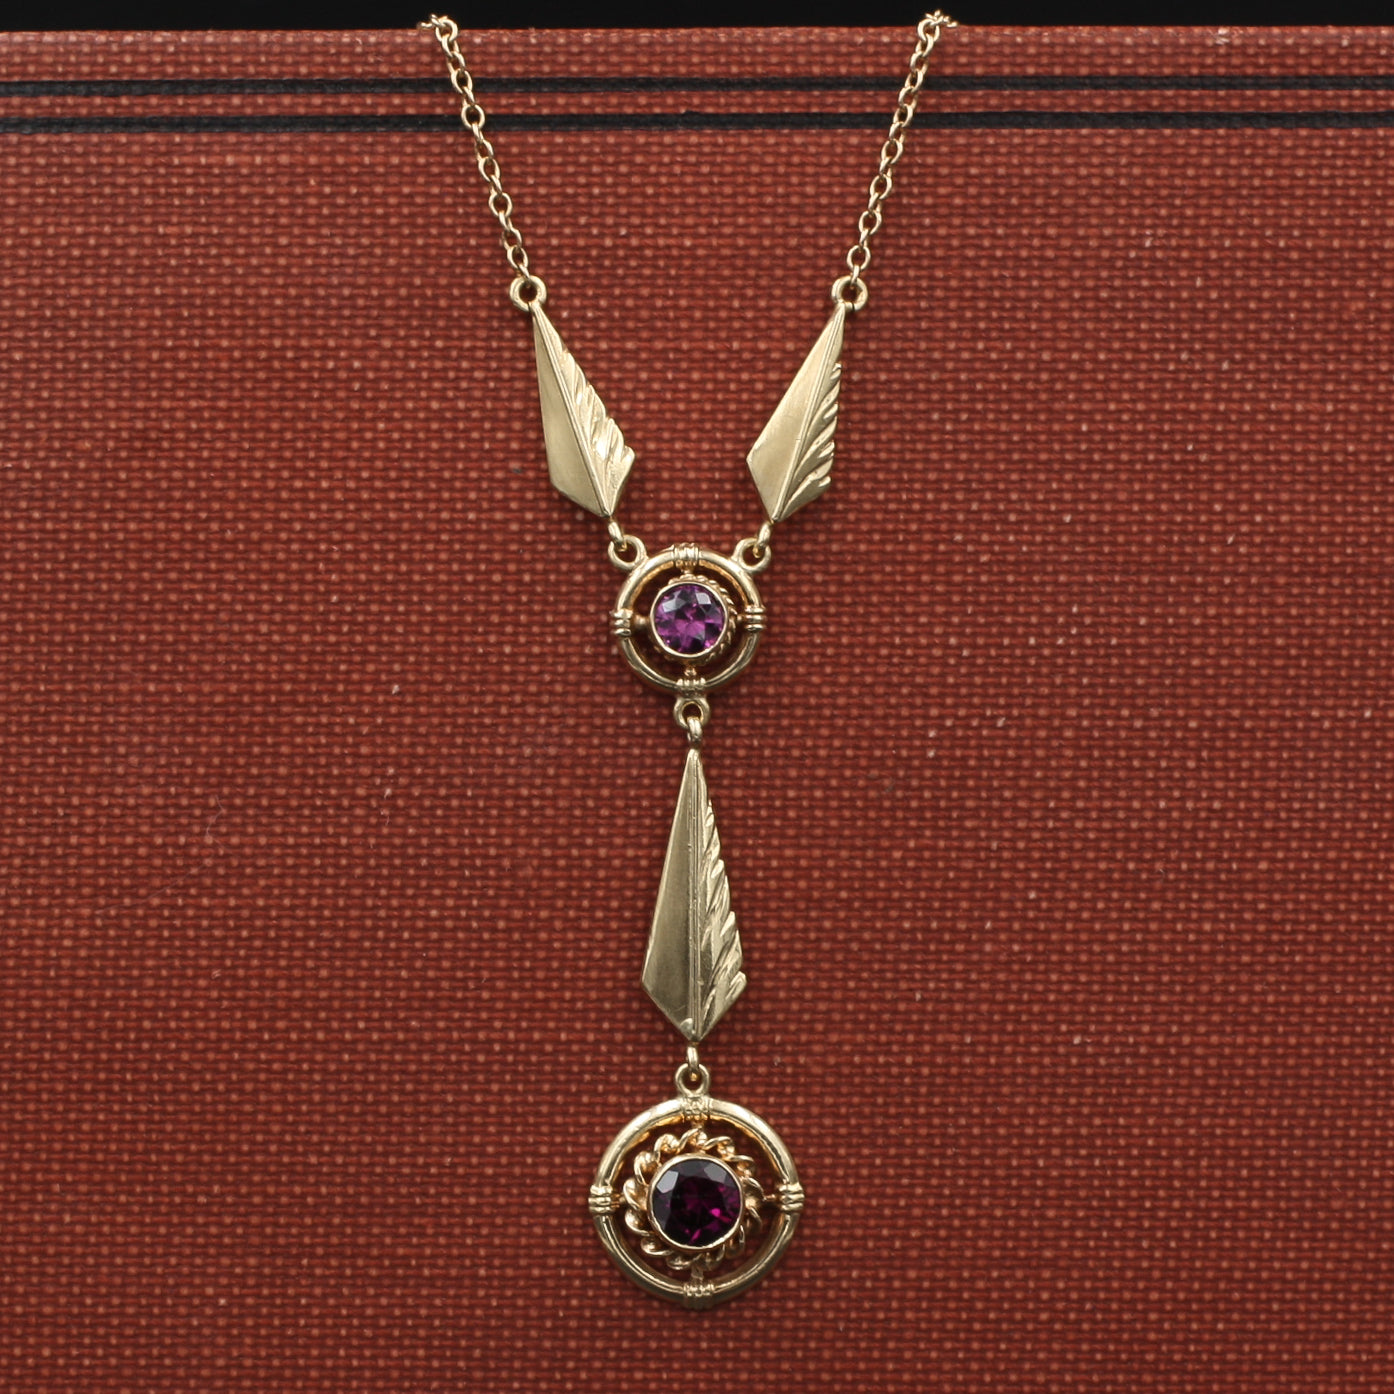 Amethyst Feathers Necklace c1930